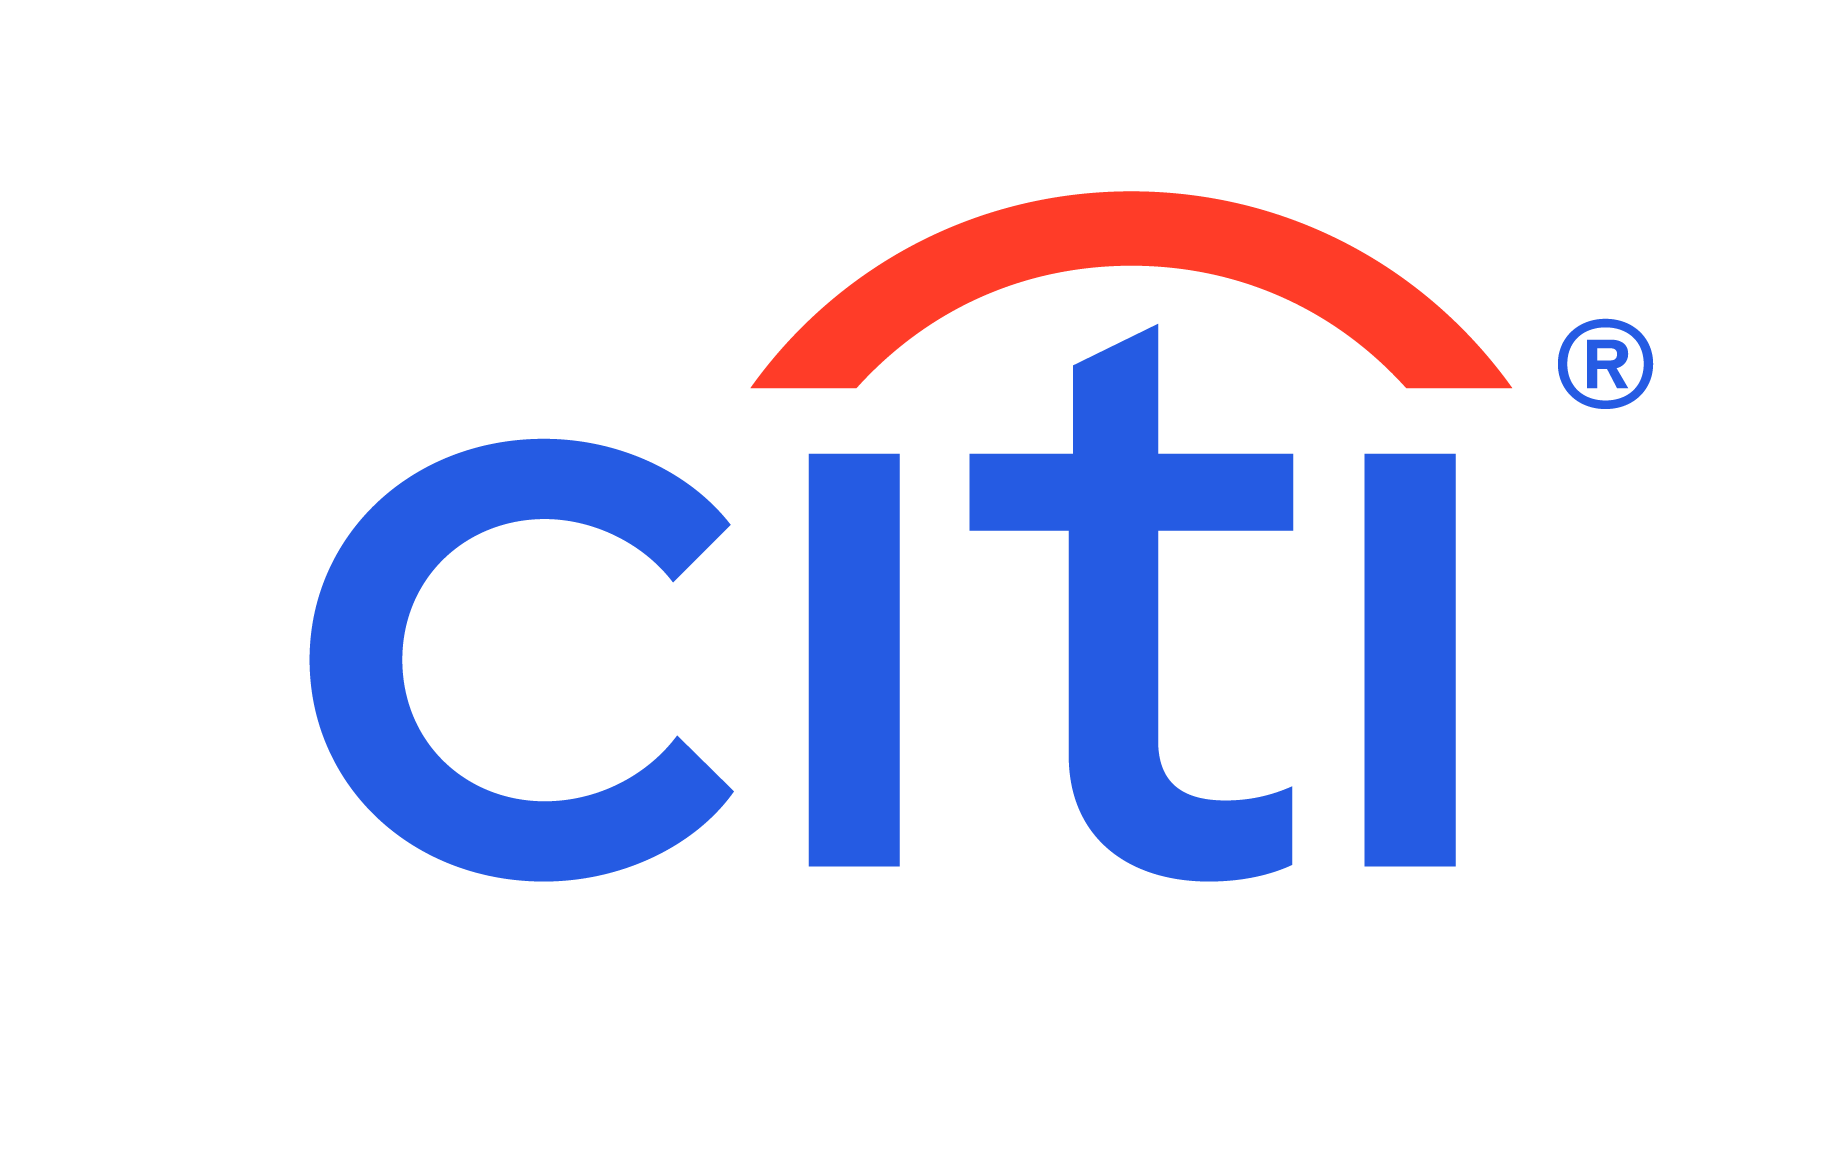 Citi® Overall Star Rating